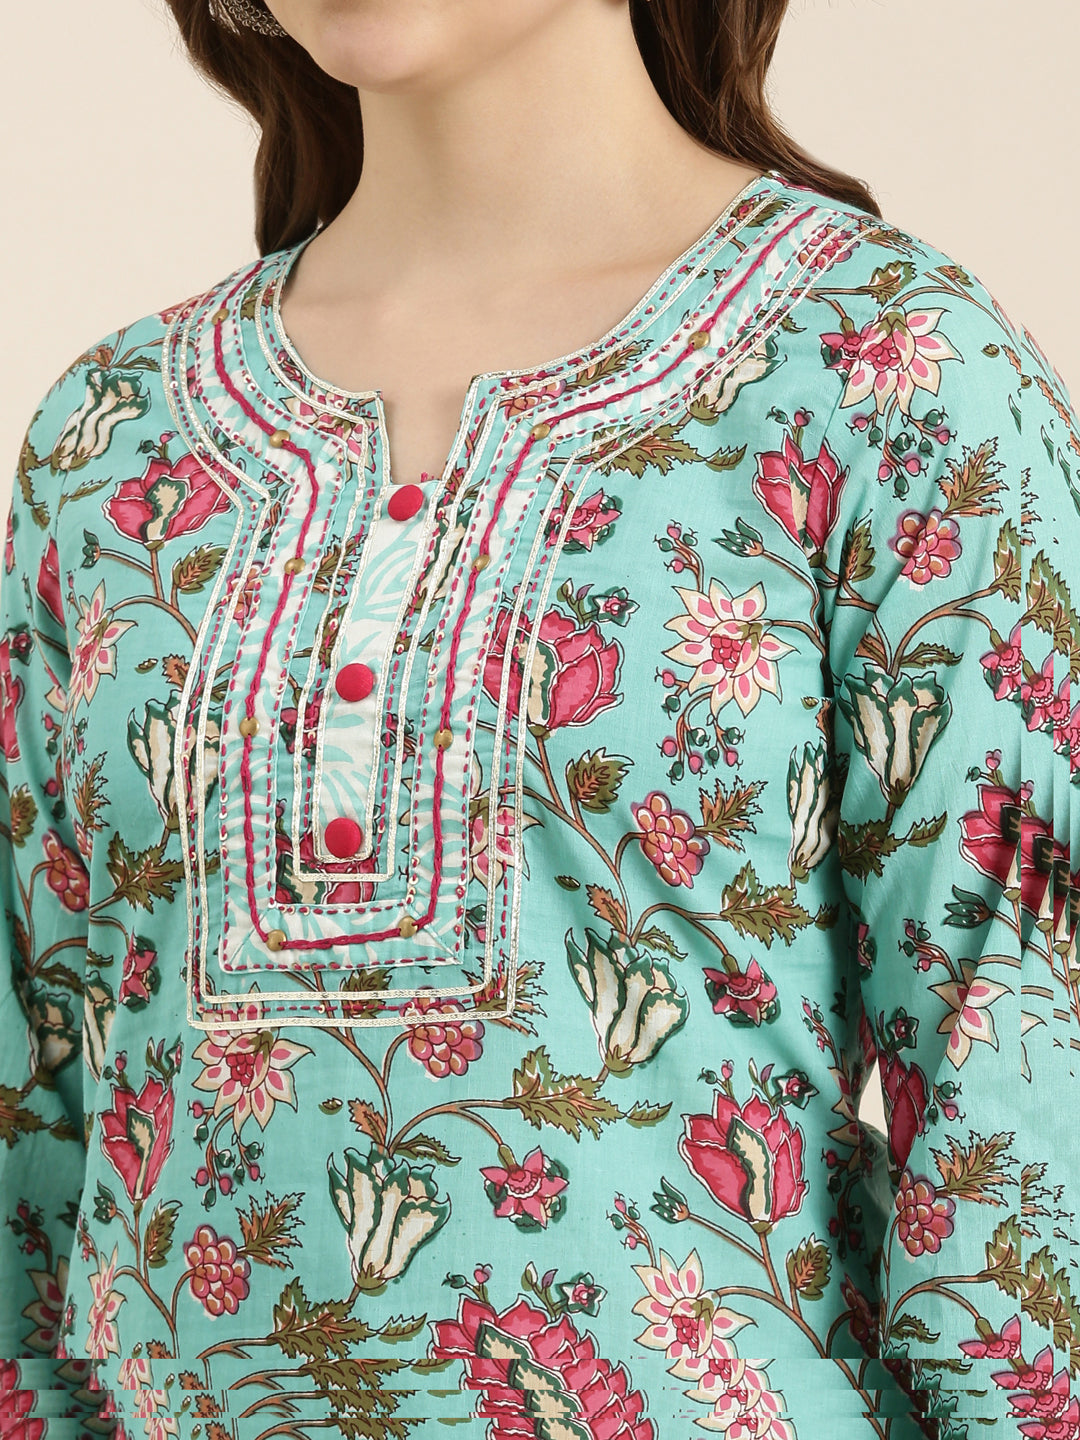 Women Straight Turquoise Blue Floral Kurta and Trousers Set Comes With Dupatta